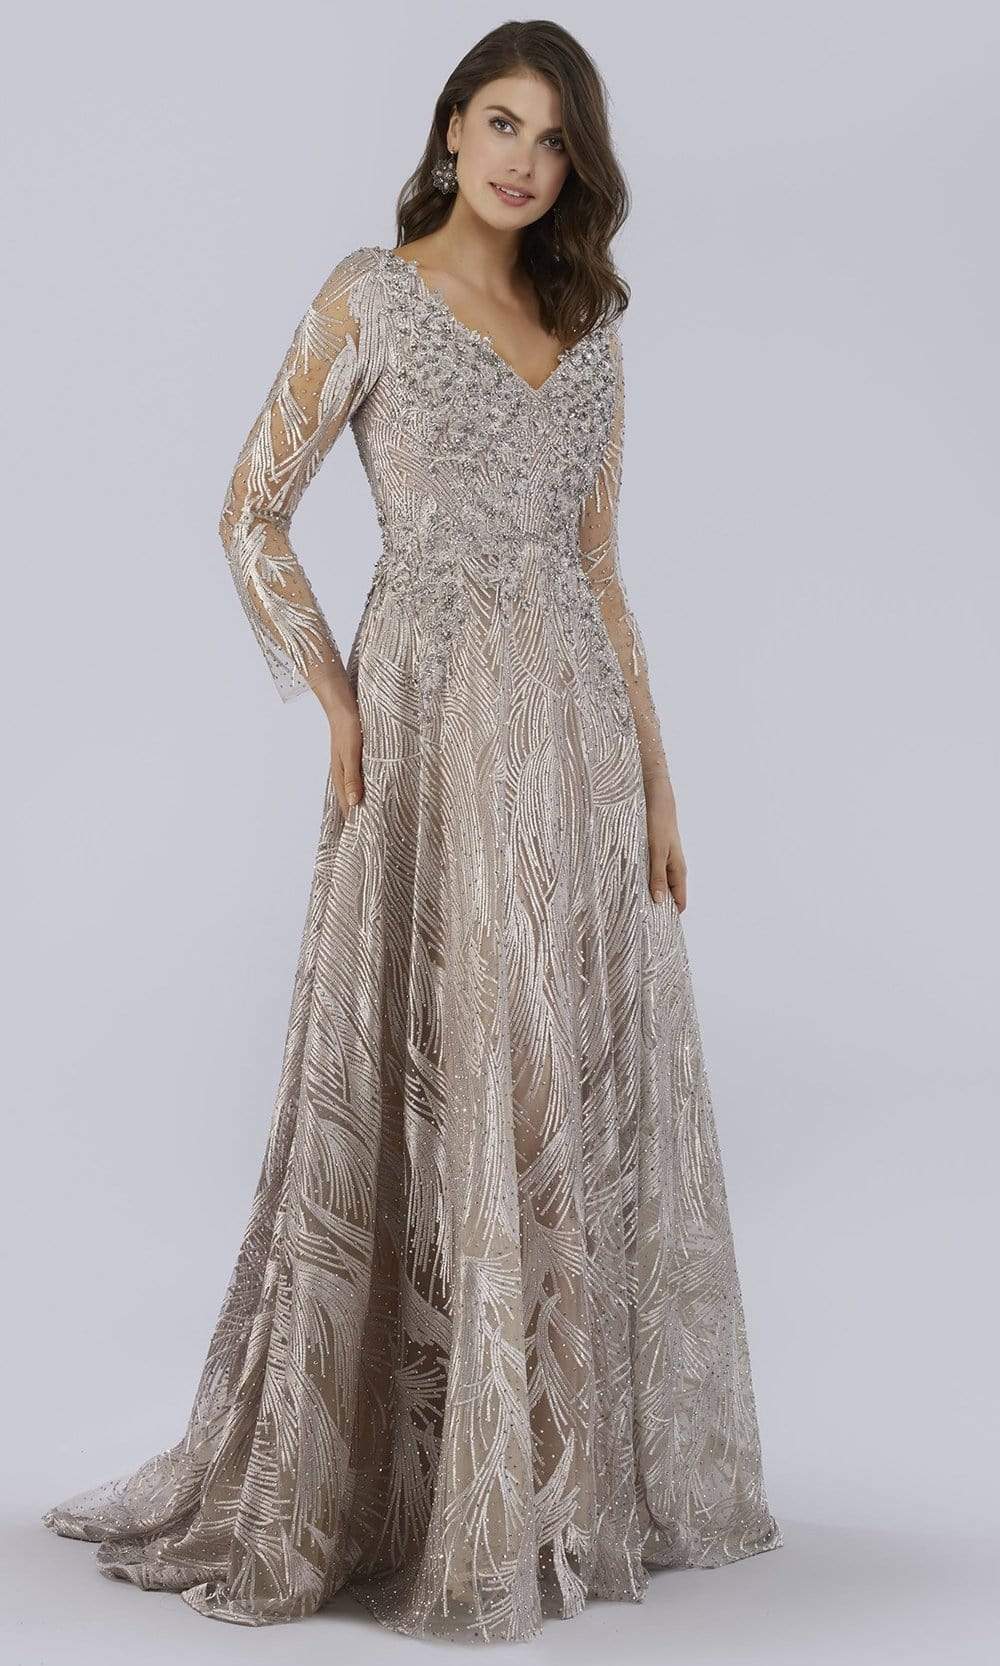 Lara Dresses - 29753 V Neck Long Sleeves Beaded Embroidered Gown
